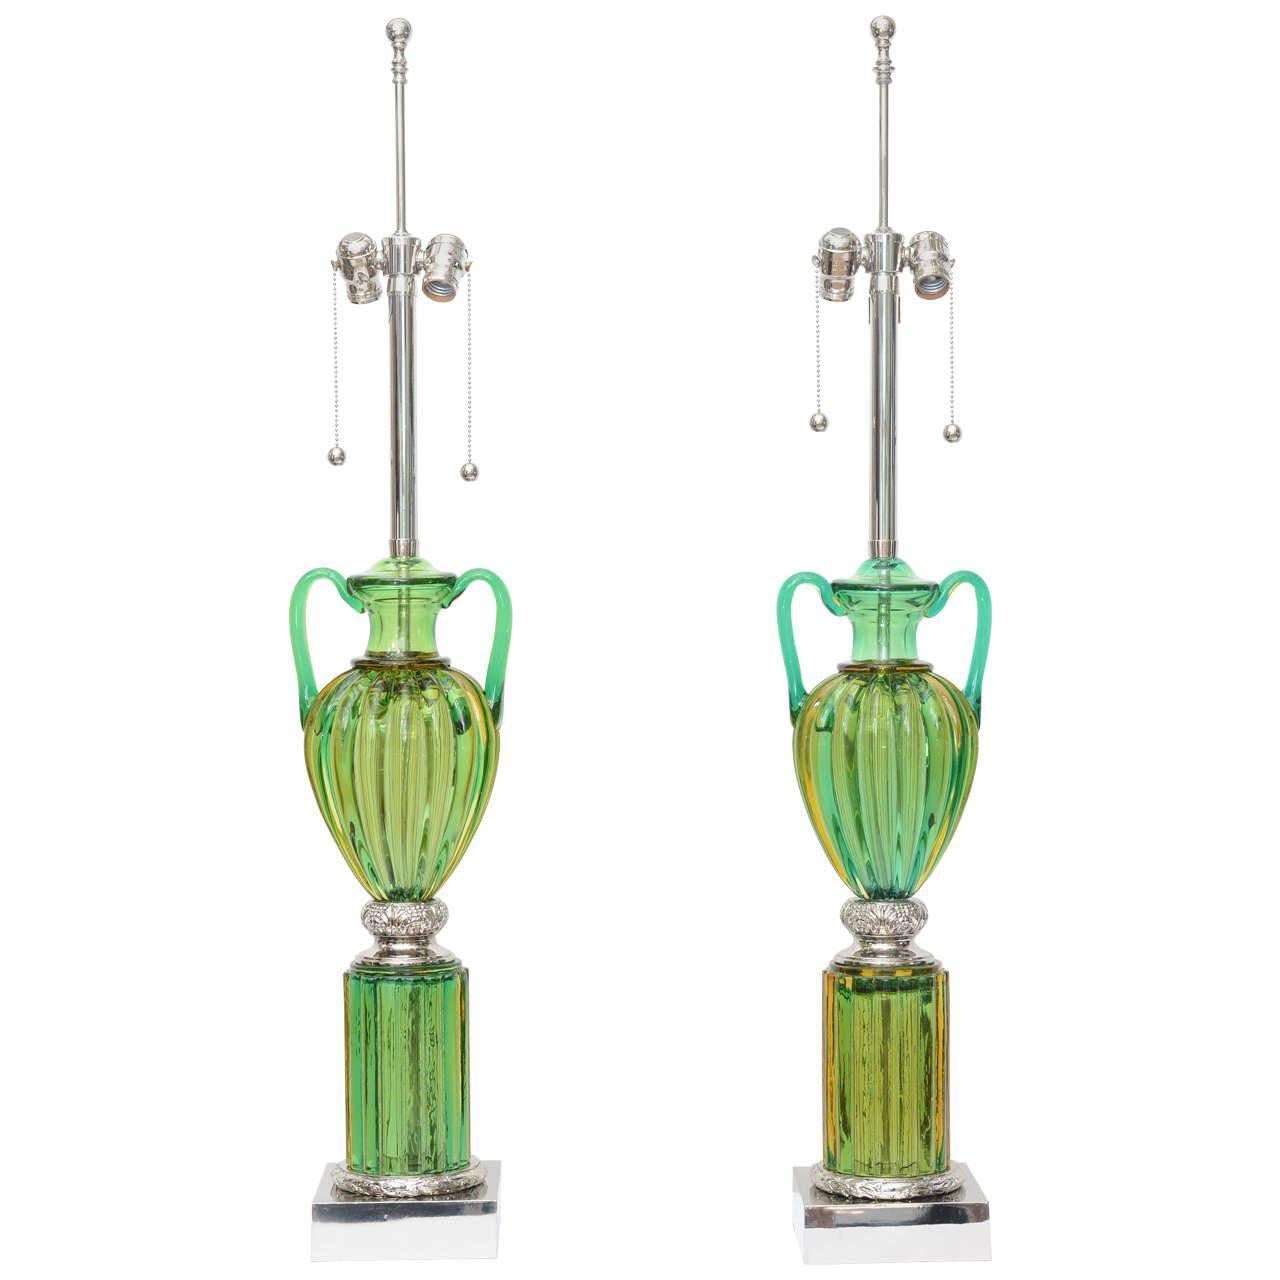 Pair of Vintage Murano Emerald Green Glass Lamps by Marbro